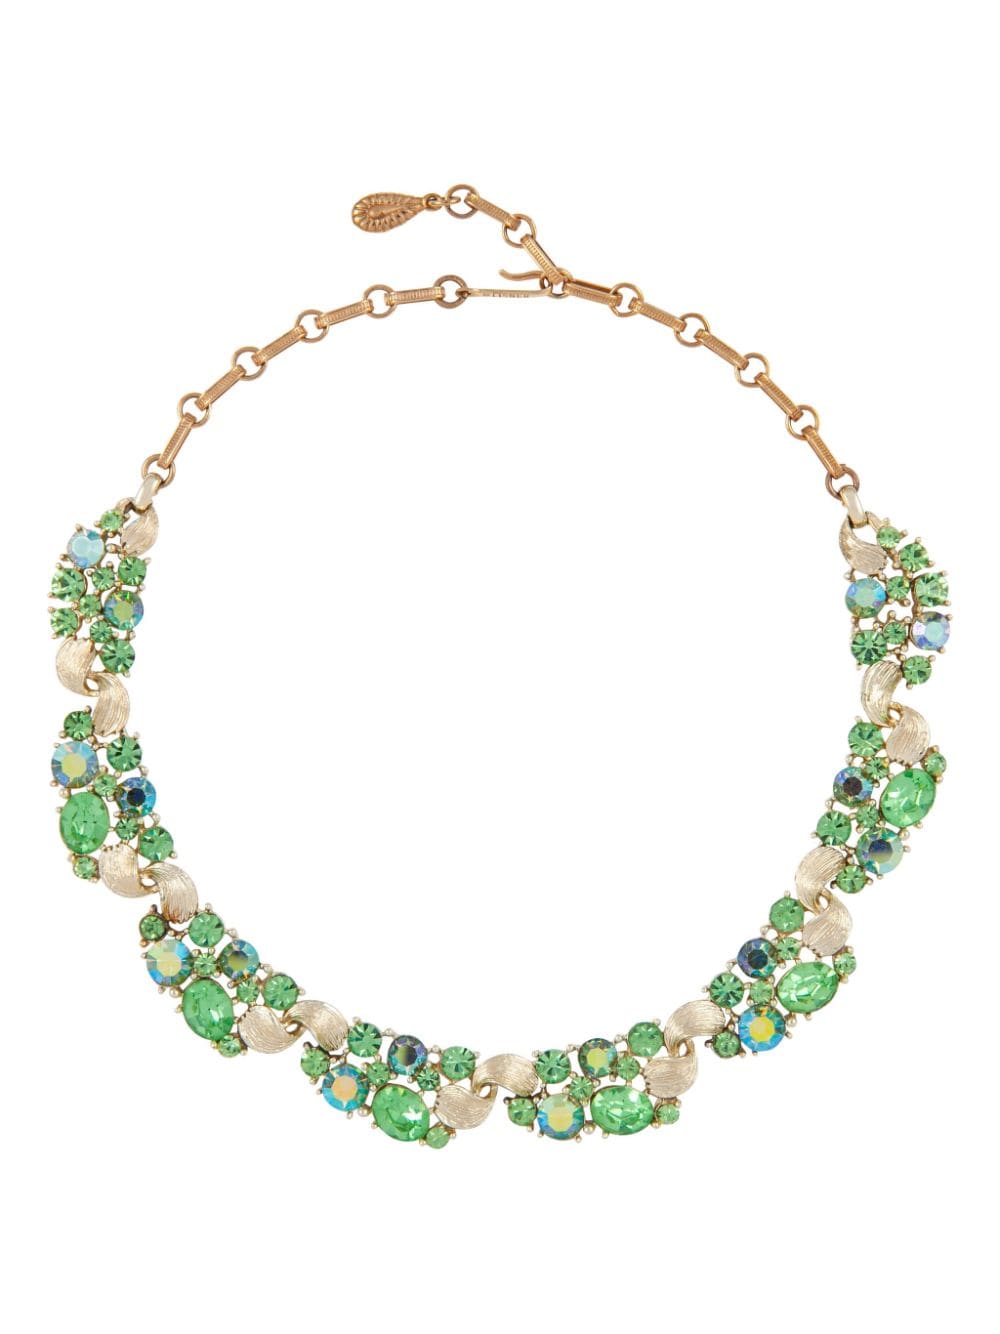 Susan Caplan Vintage 1960s Lisner peridot and crystal embellished necklace - Oro